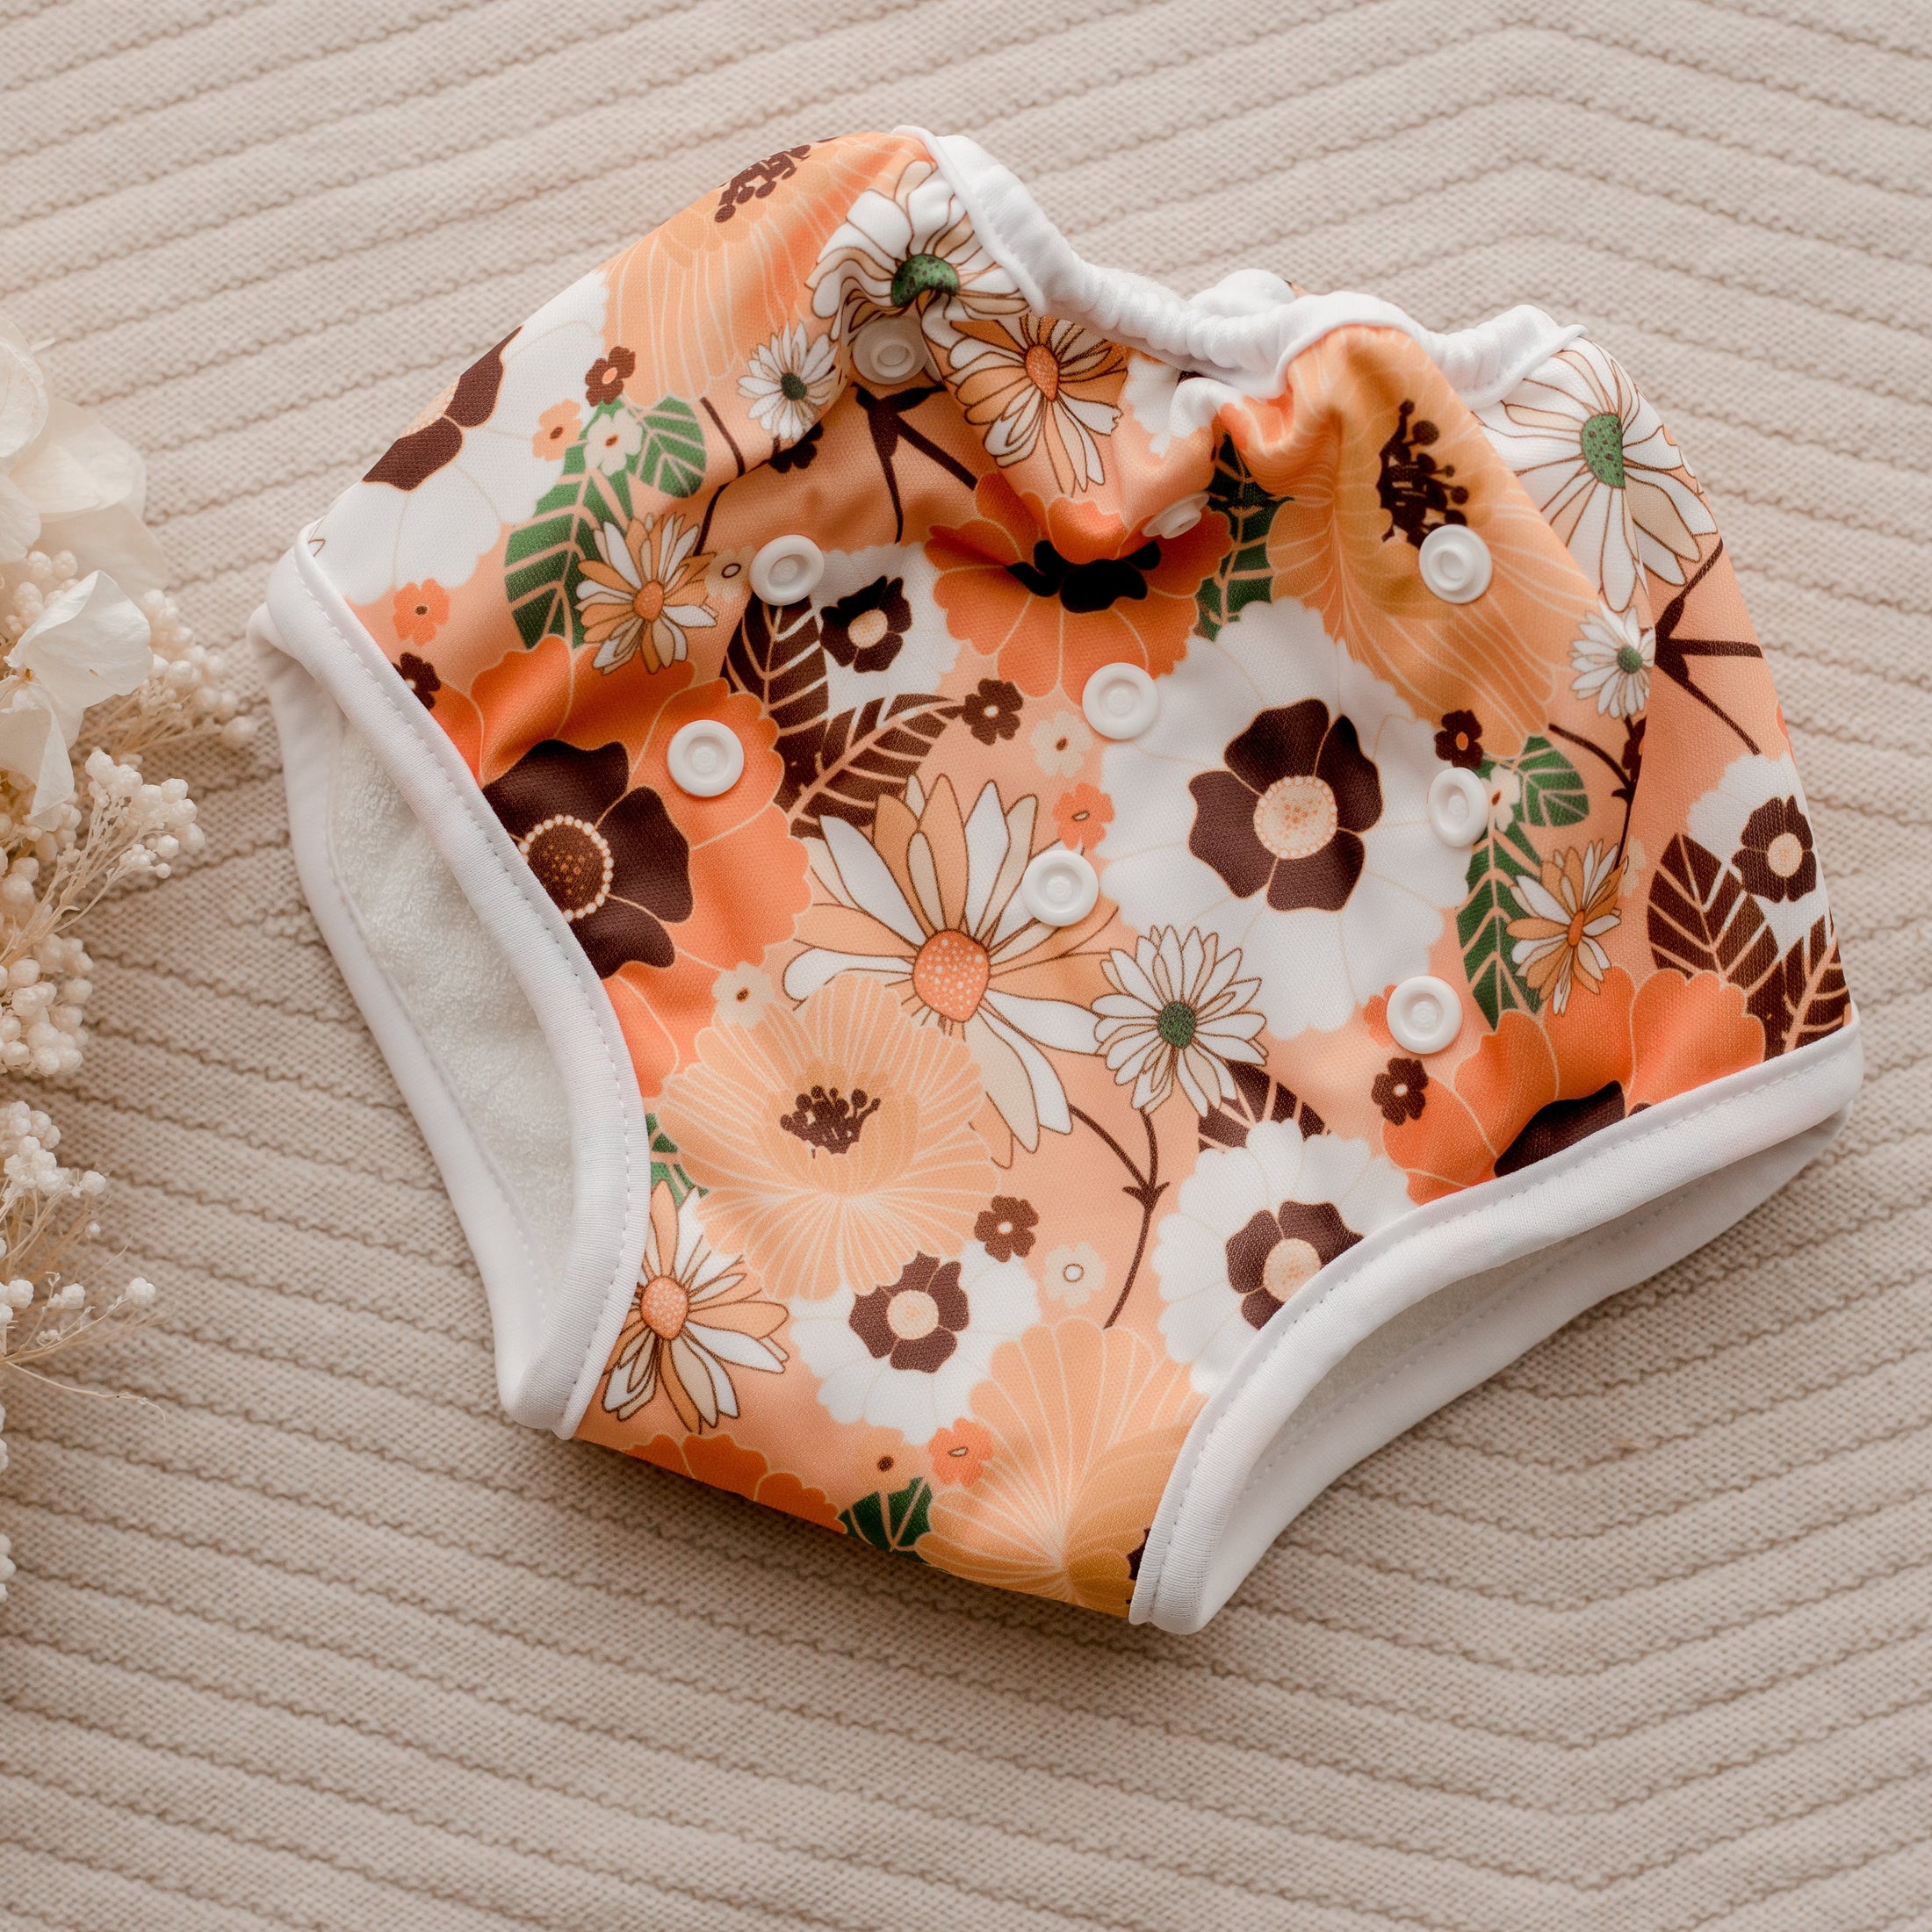 Reusable training pants by my little gumnut. australian owned reusable nappies. cloth training nappies. toddler nappies.